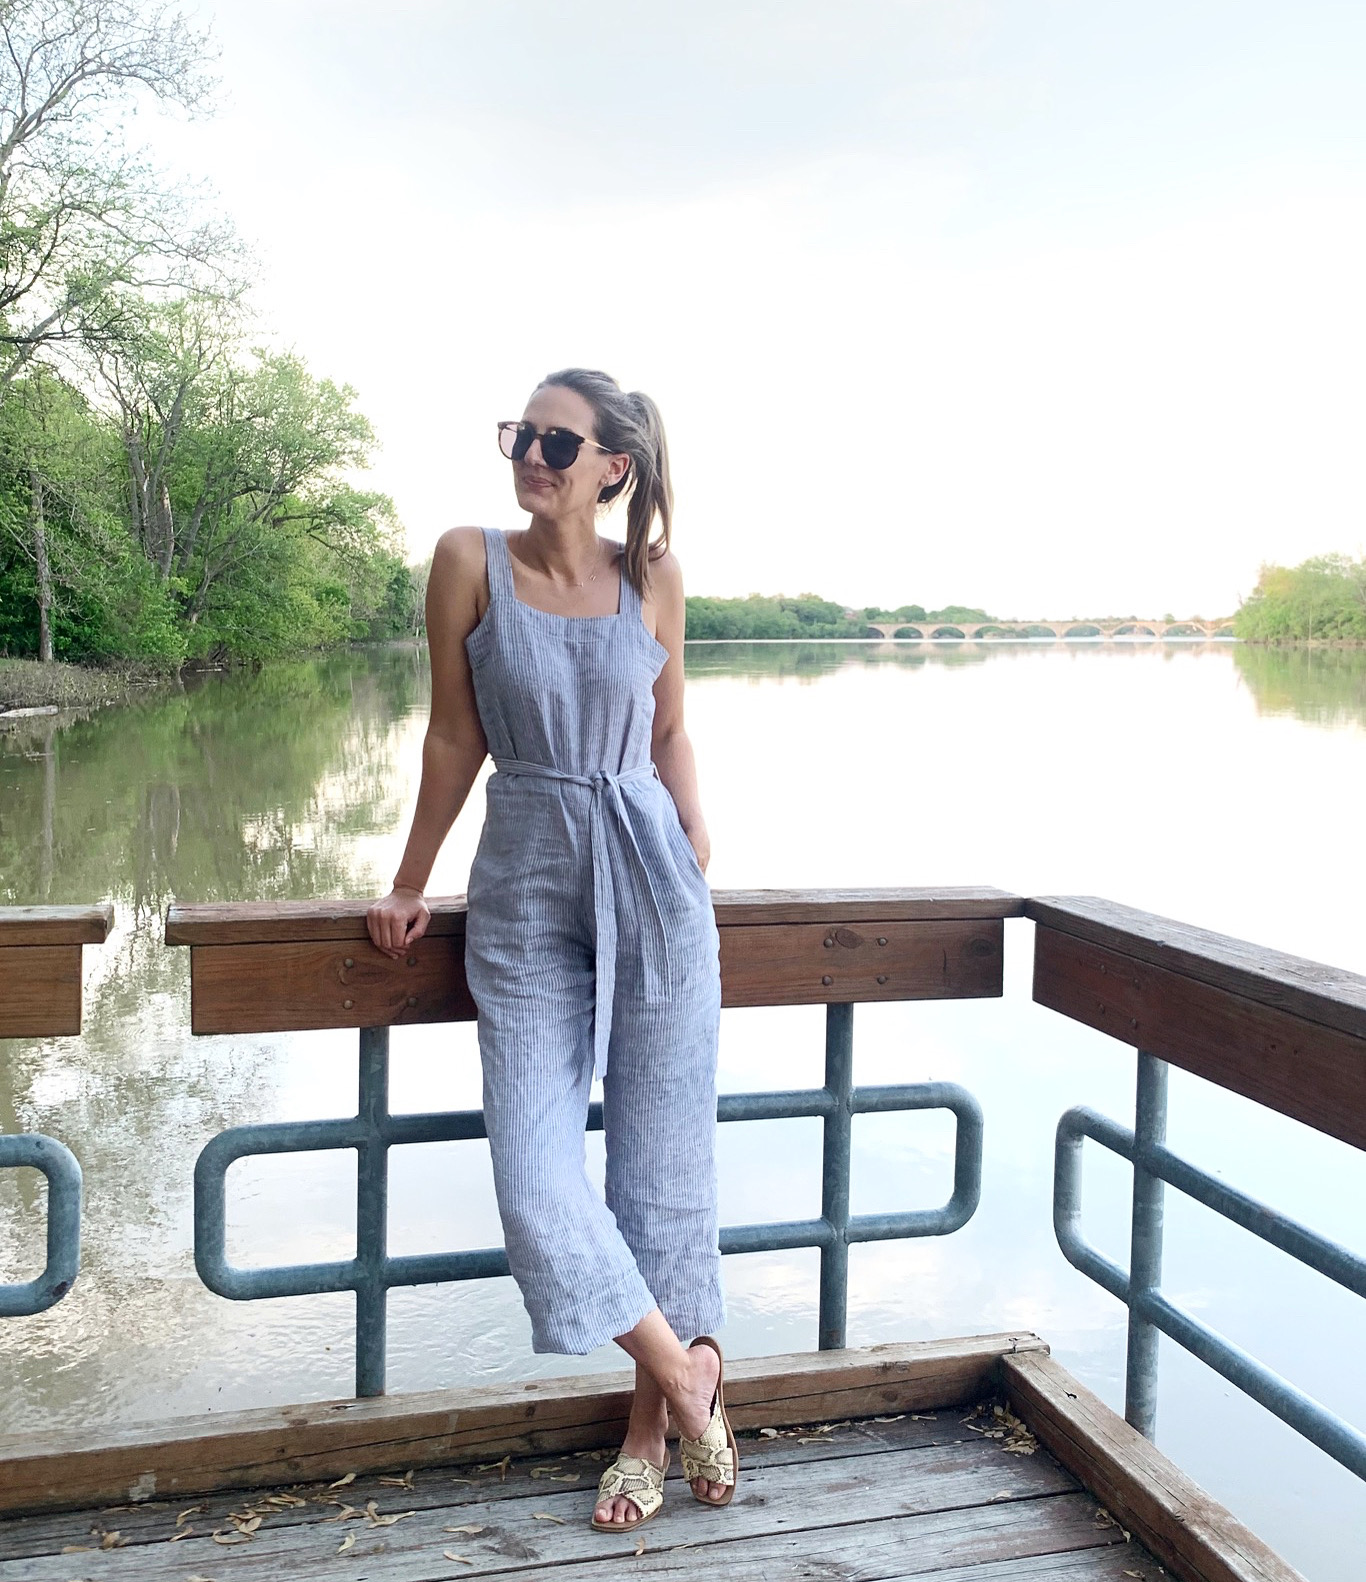 How to style a denim jumpsuit?